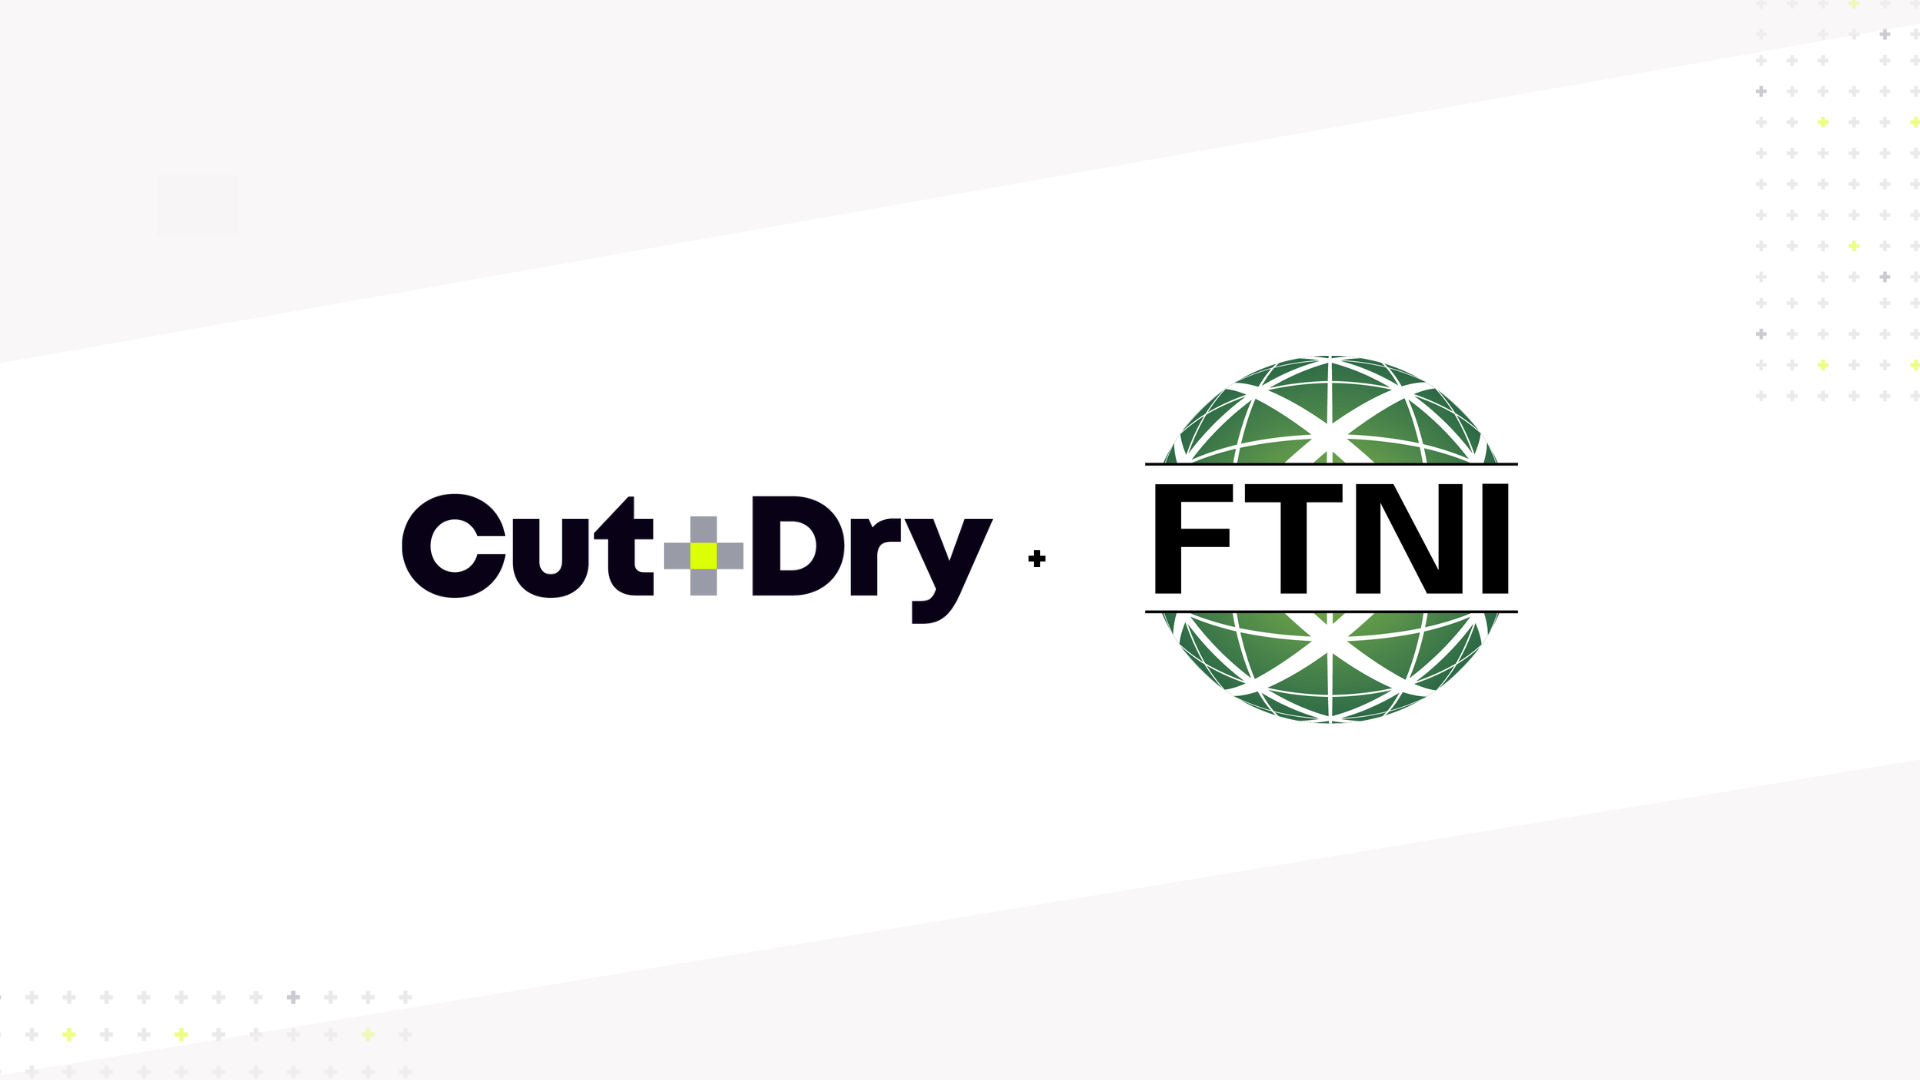 image of FTNI and Cut+Dry join exclusive partnership